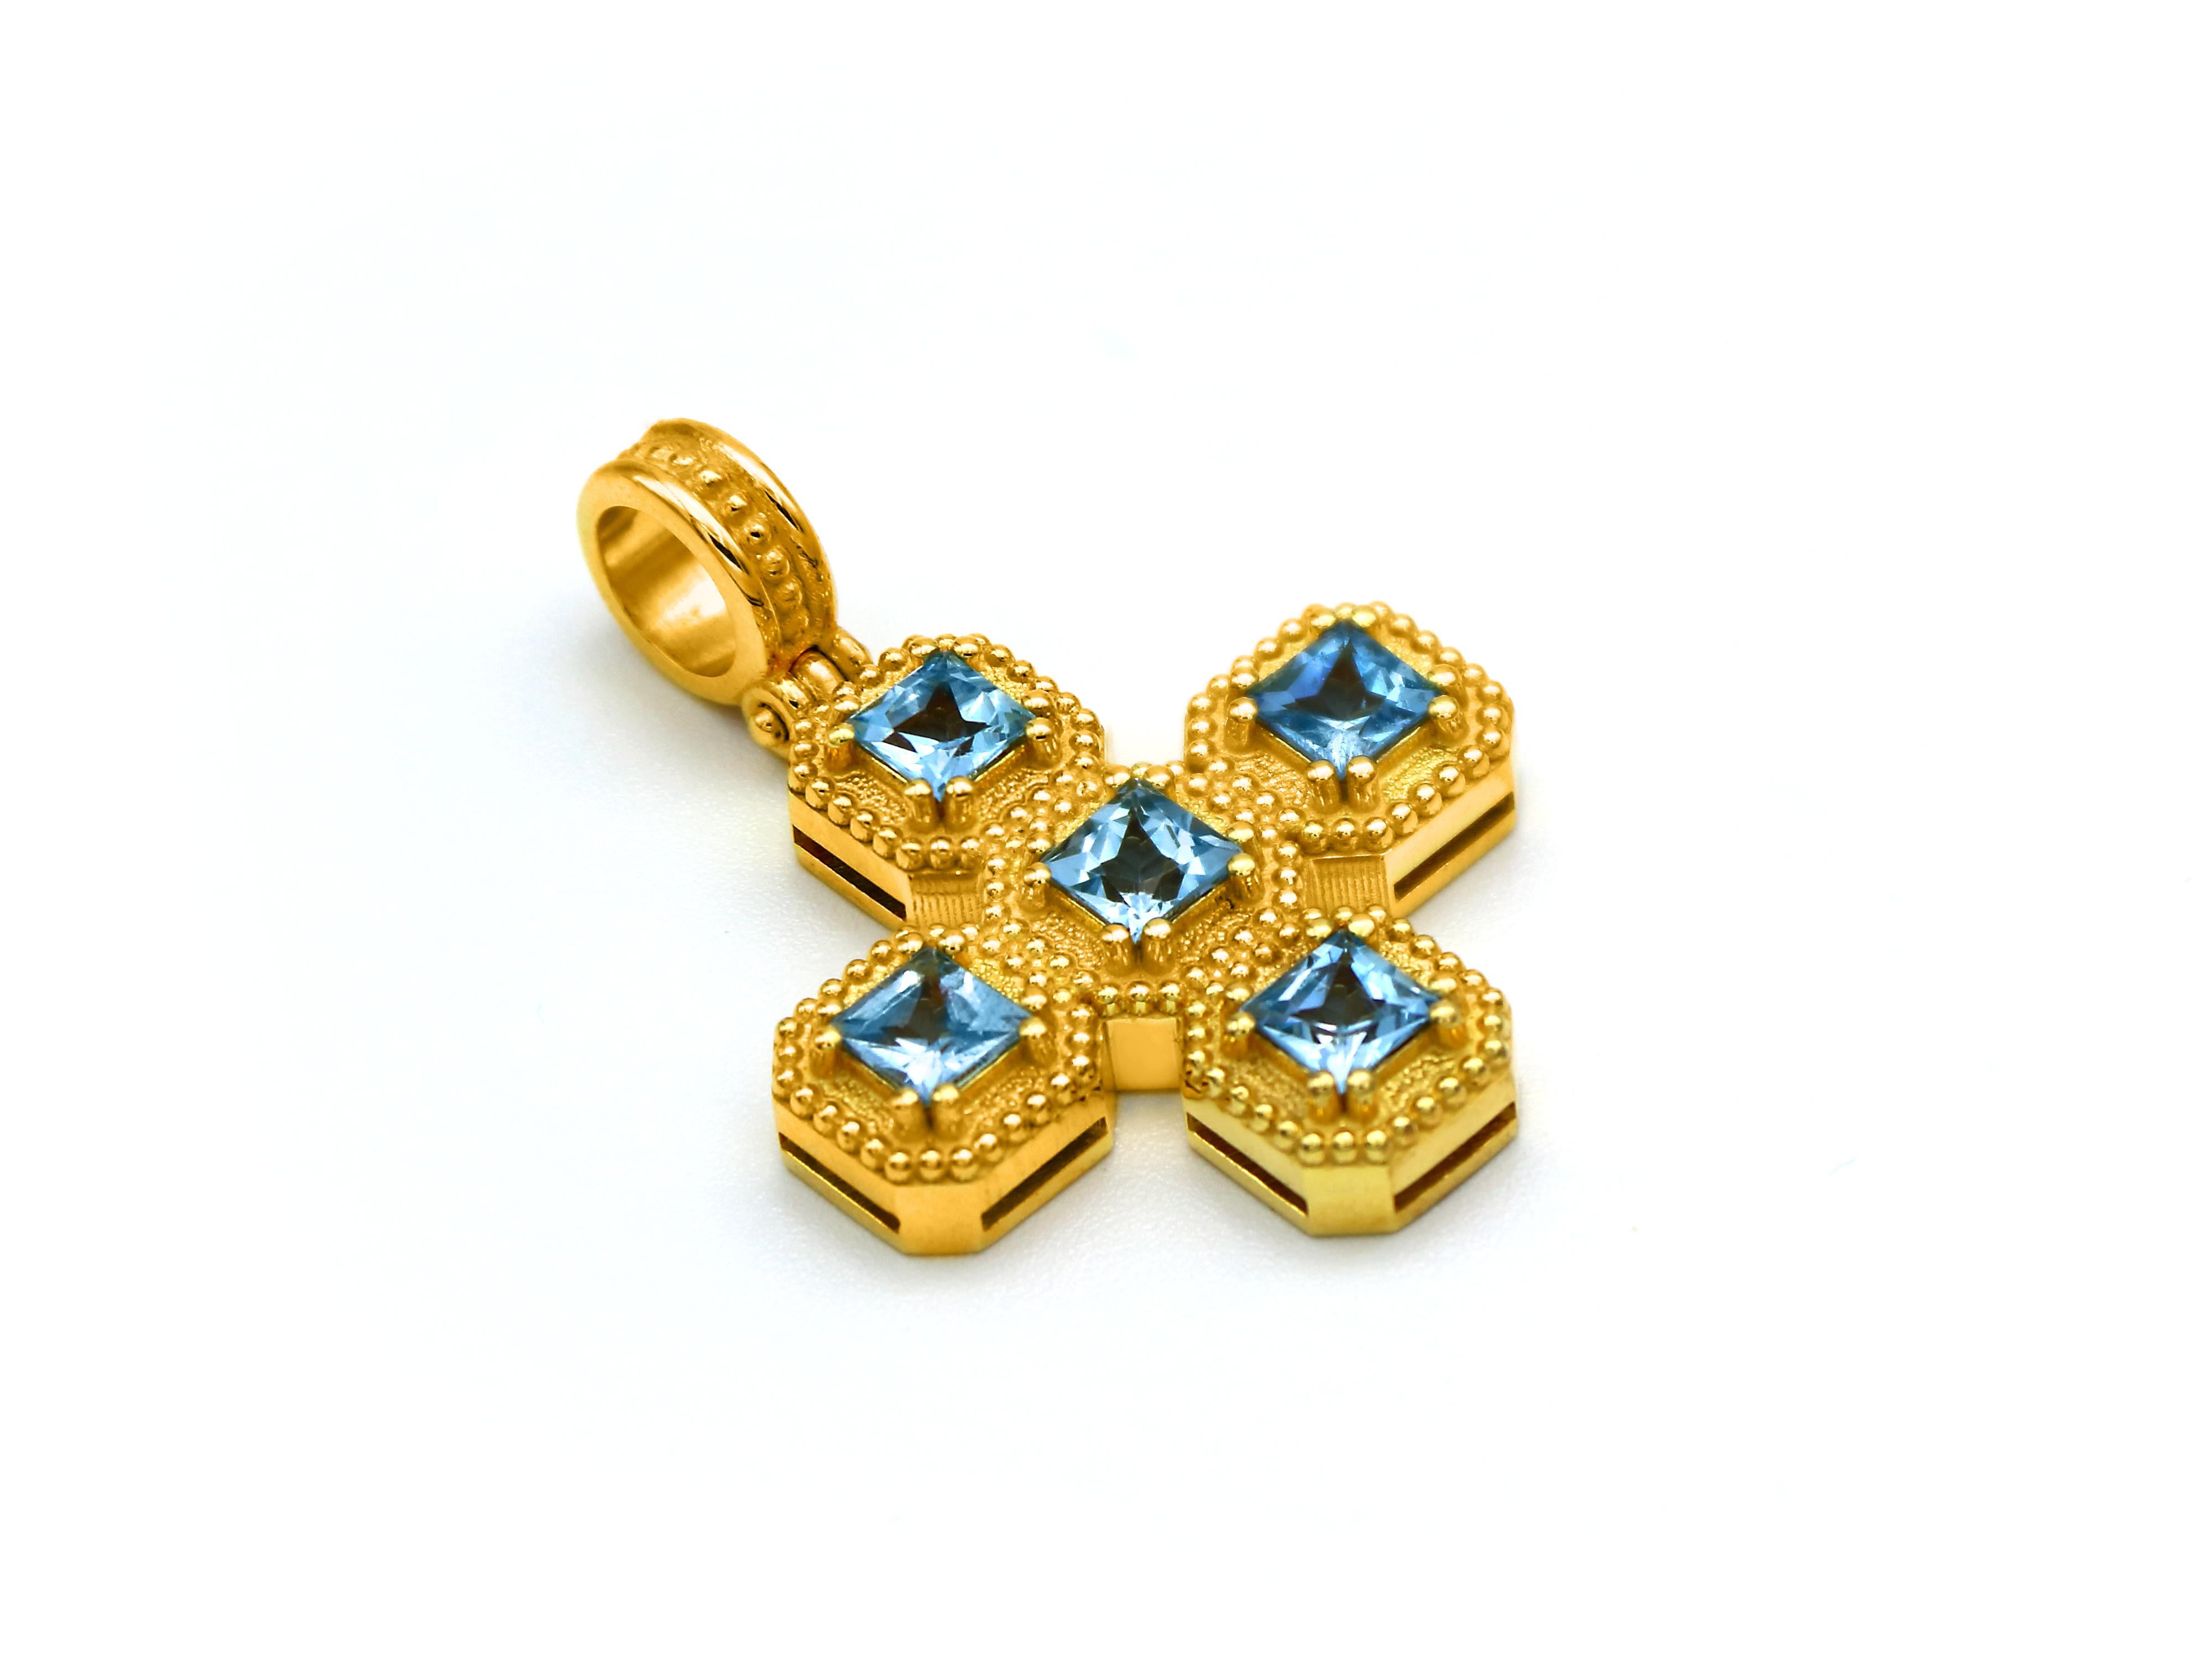 Neoclassical Dimos 18k Gold Cross Pendant with Aquamarines For Sale